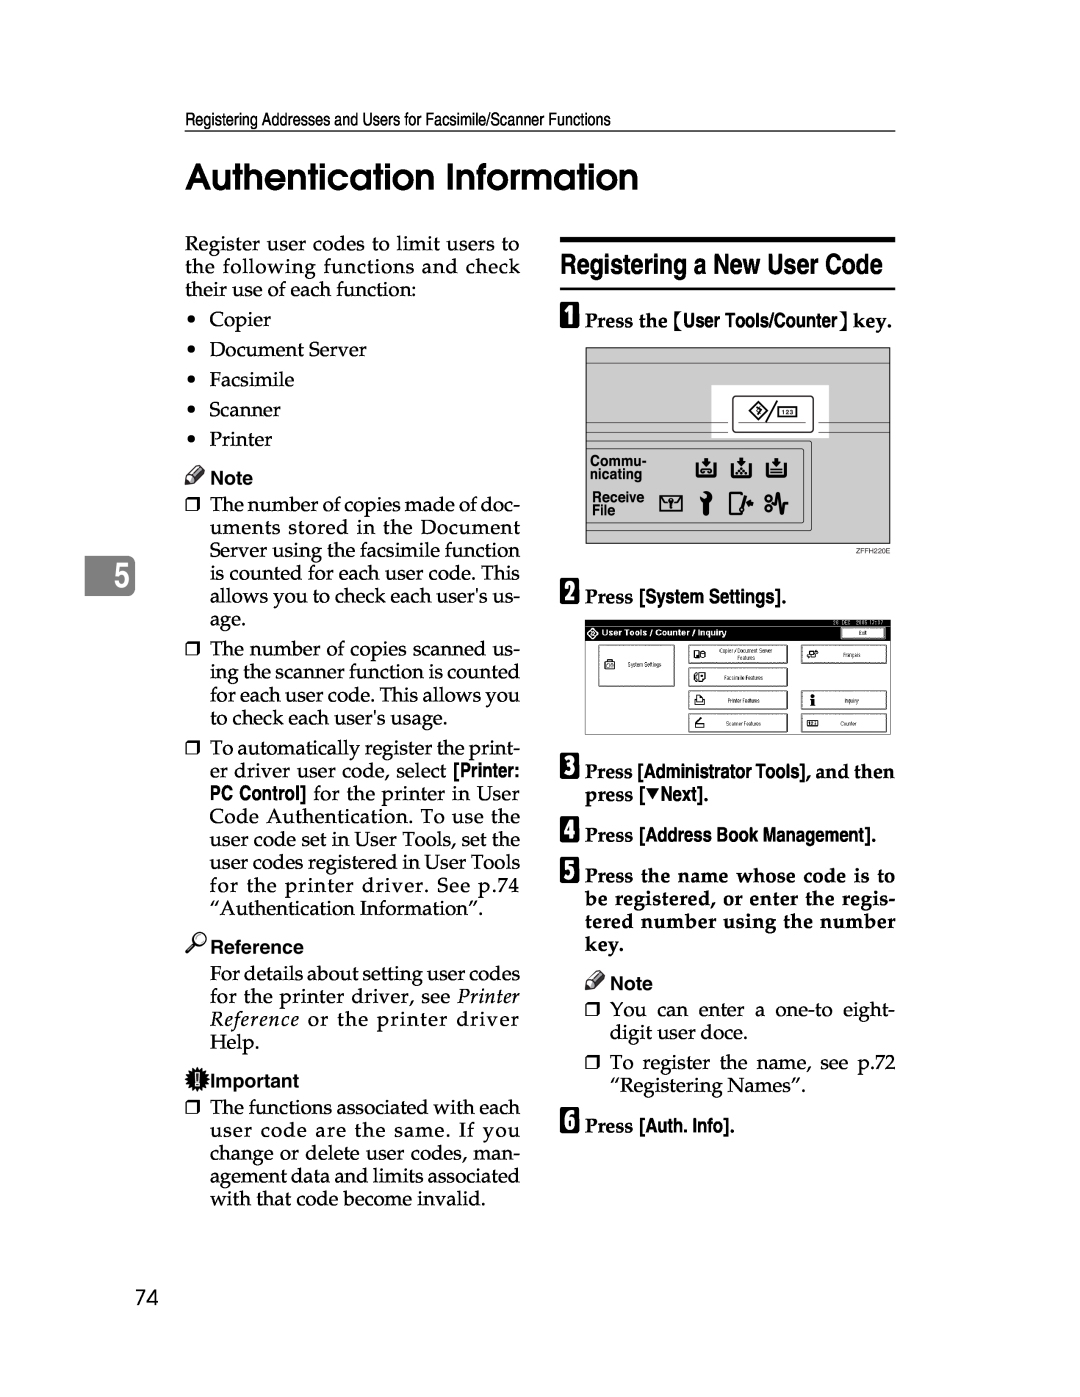 Lanier LD225, LD230 manual Authentication Information, Registering a New User Code, F Press Auth. Info, Reference 